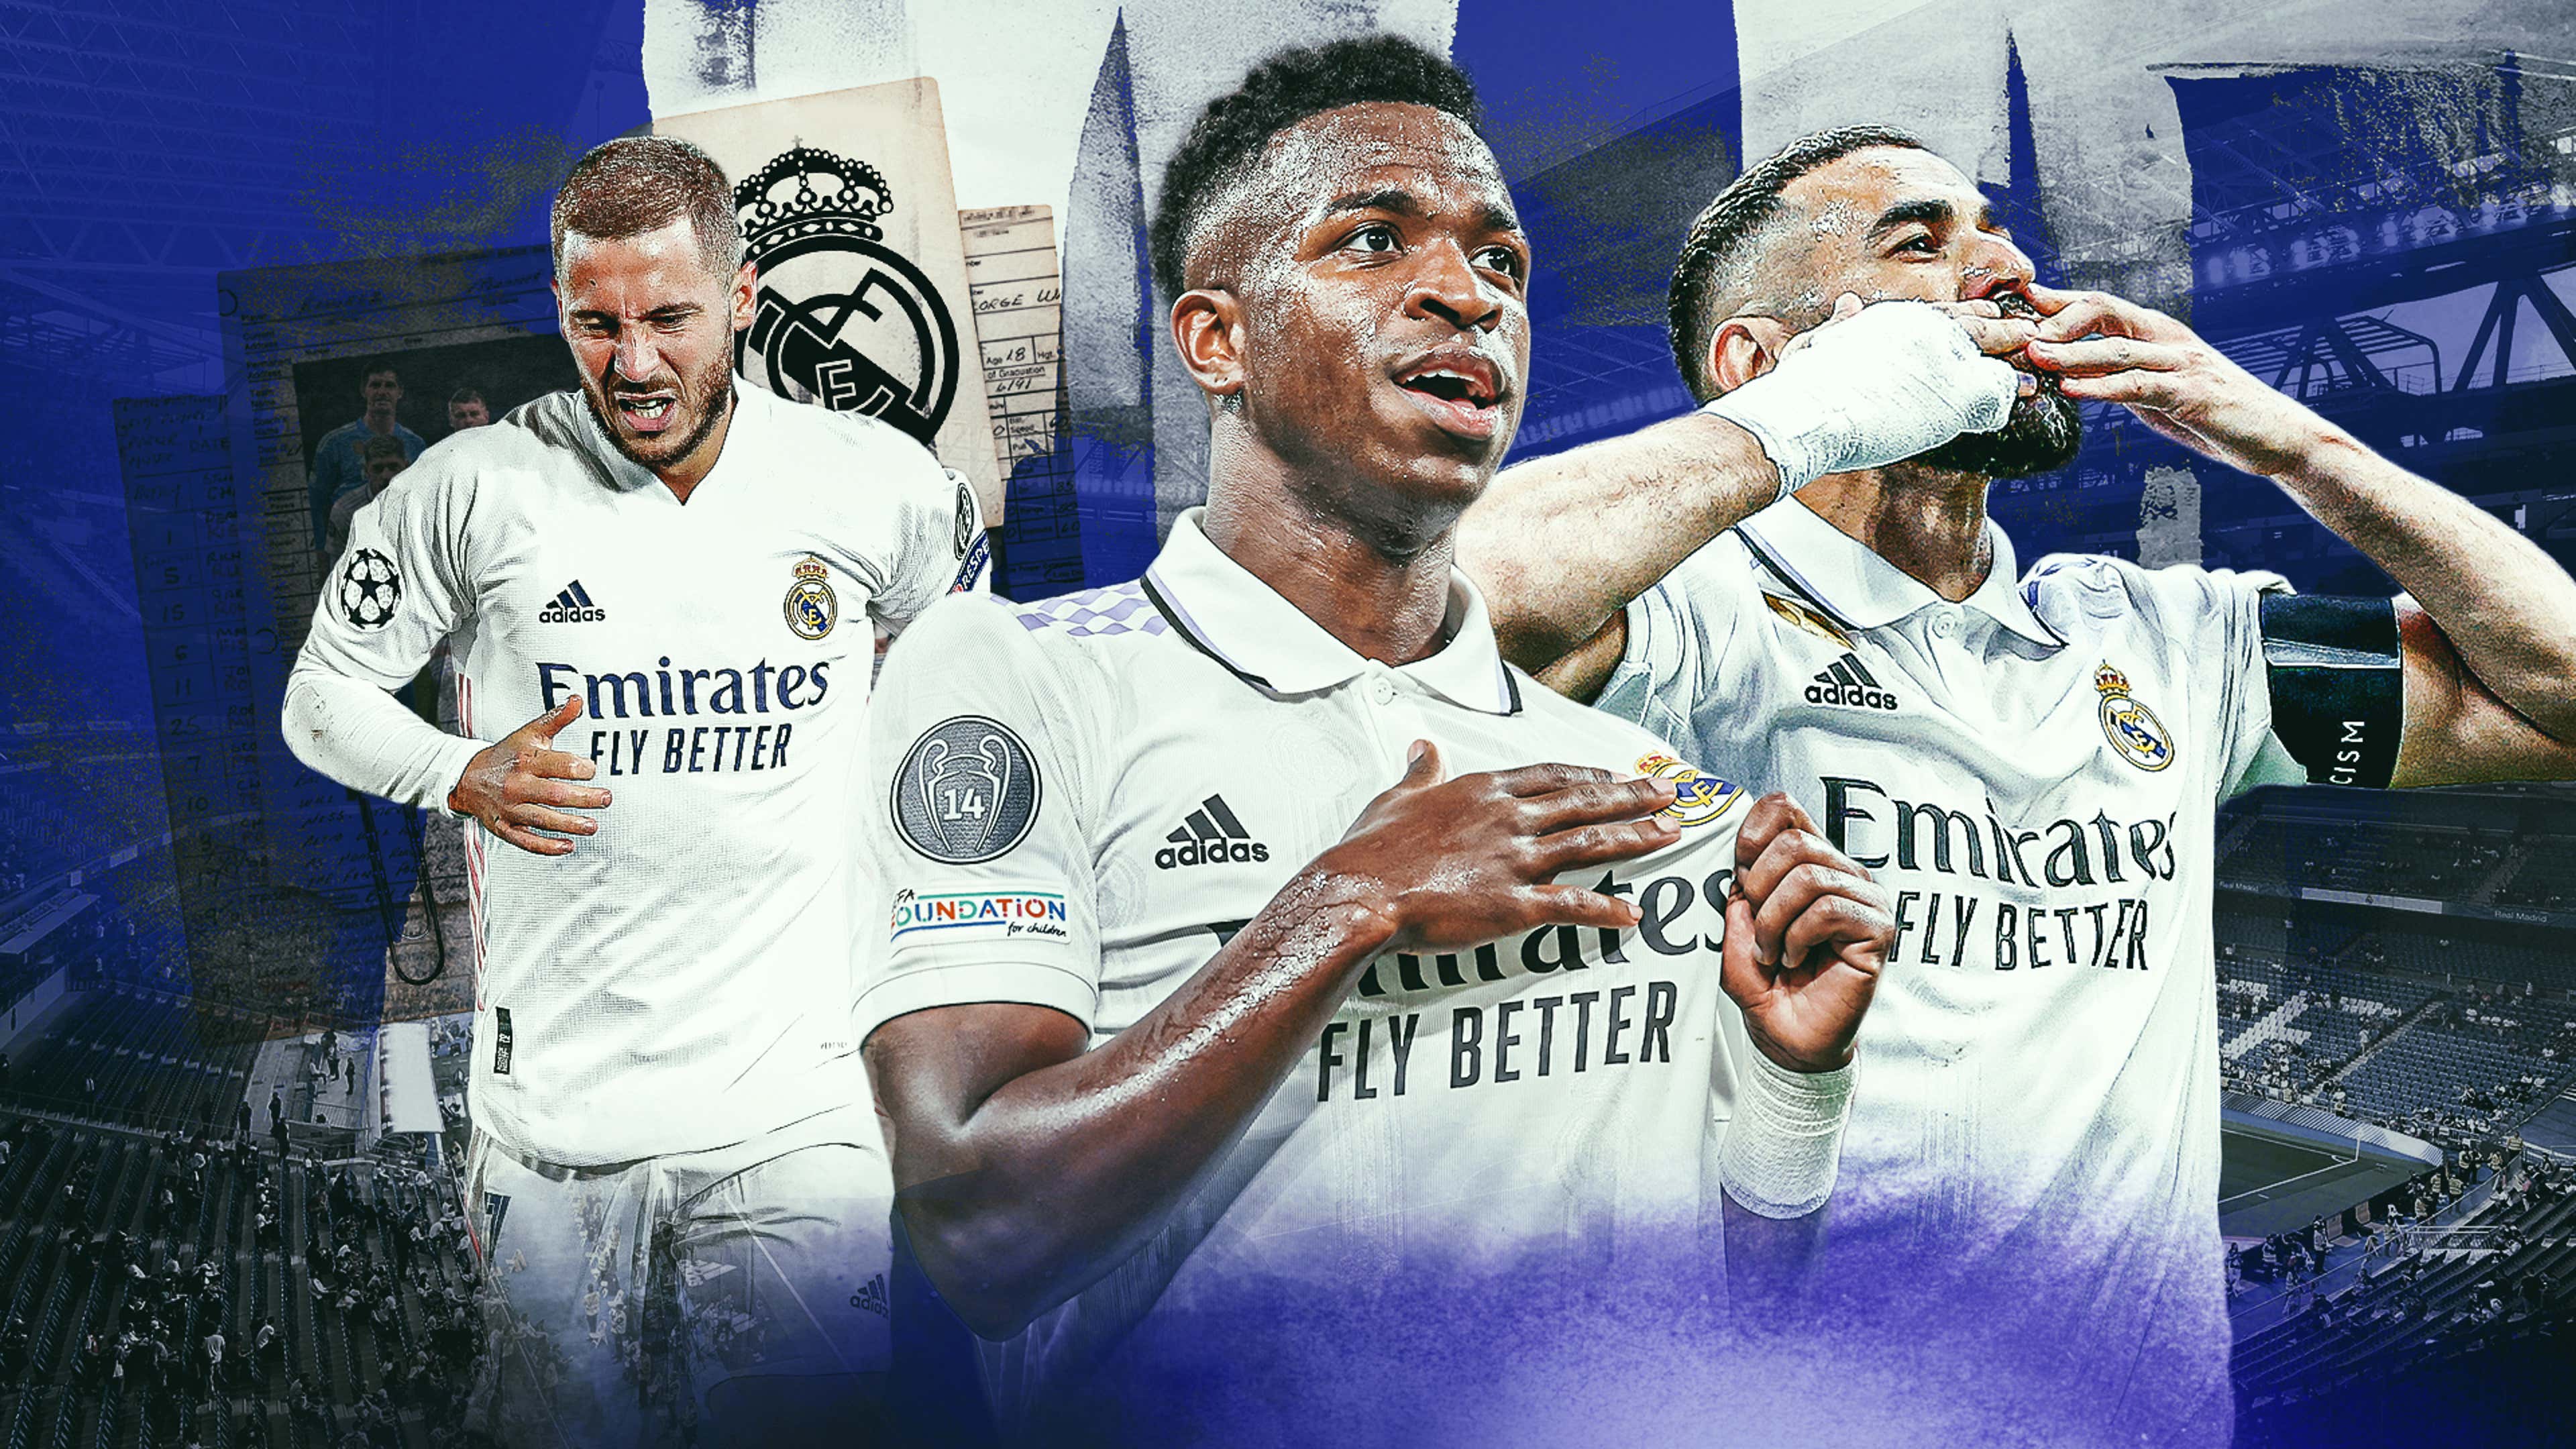 Who are the best young talents at Real Madrid?